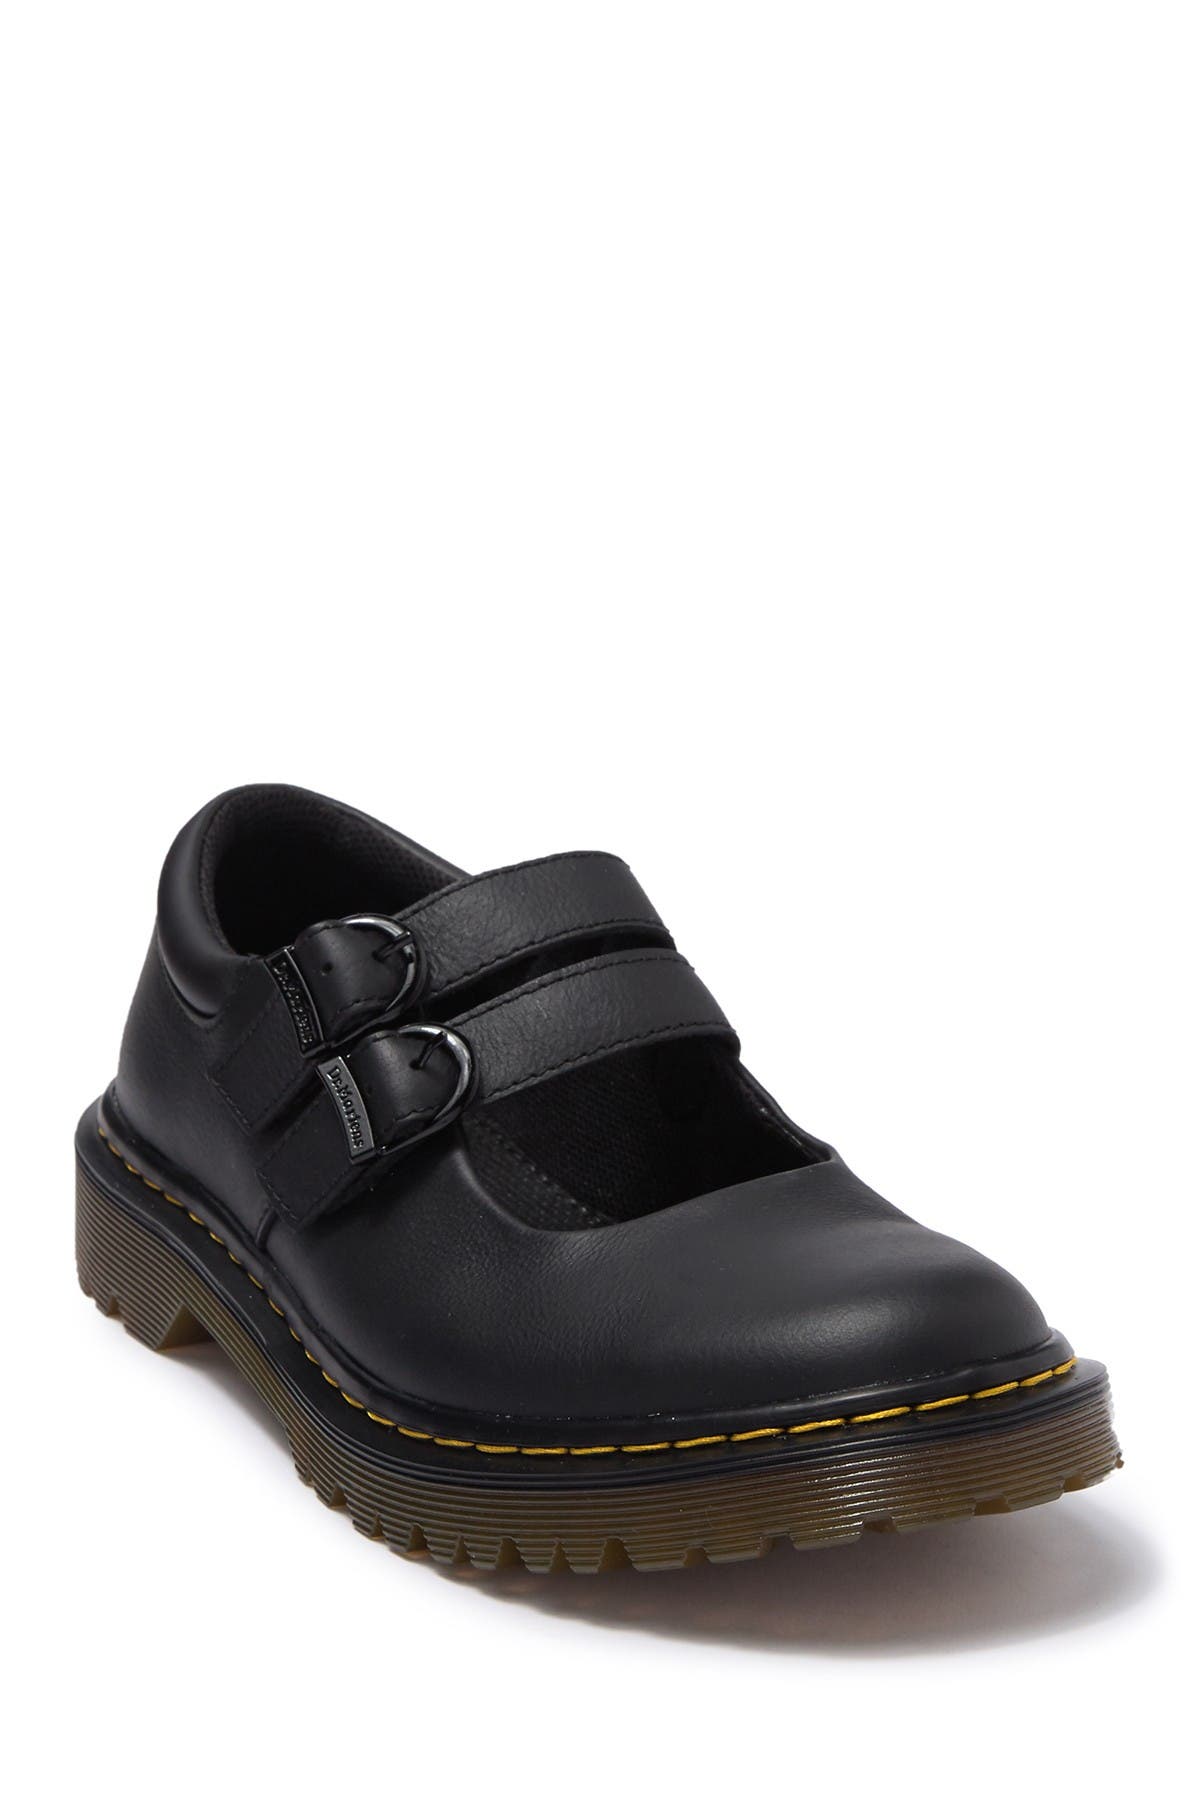 dr martens mary janes size 6